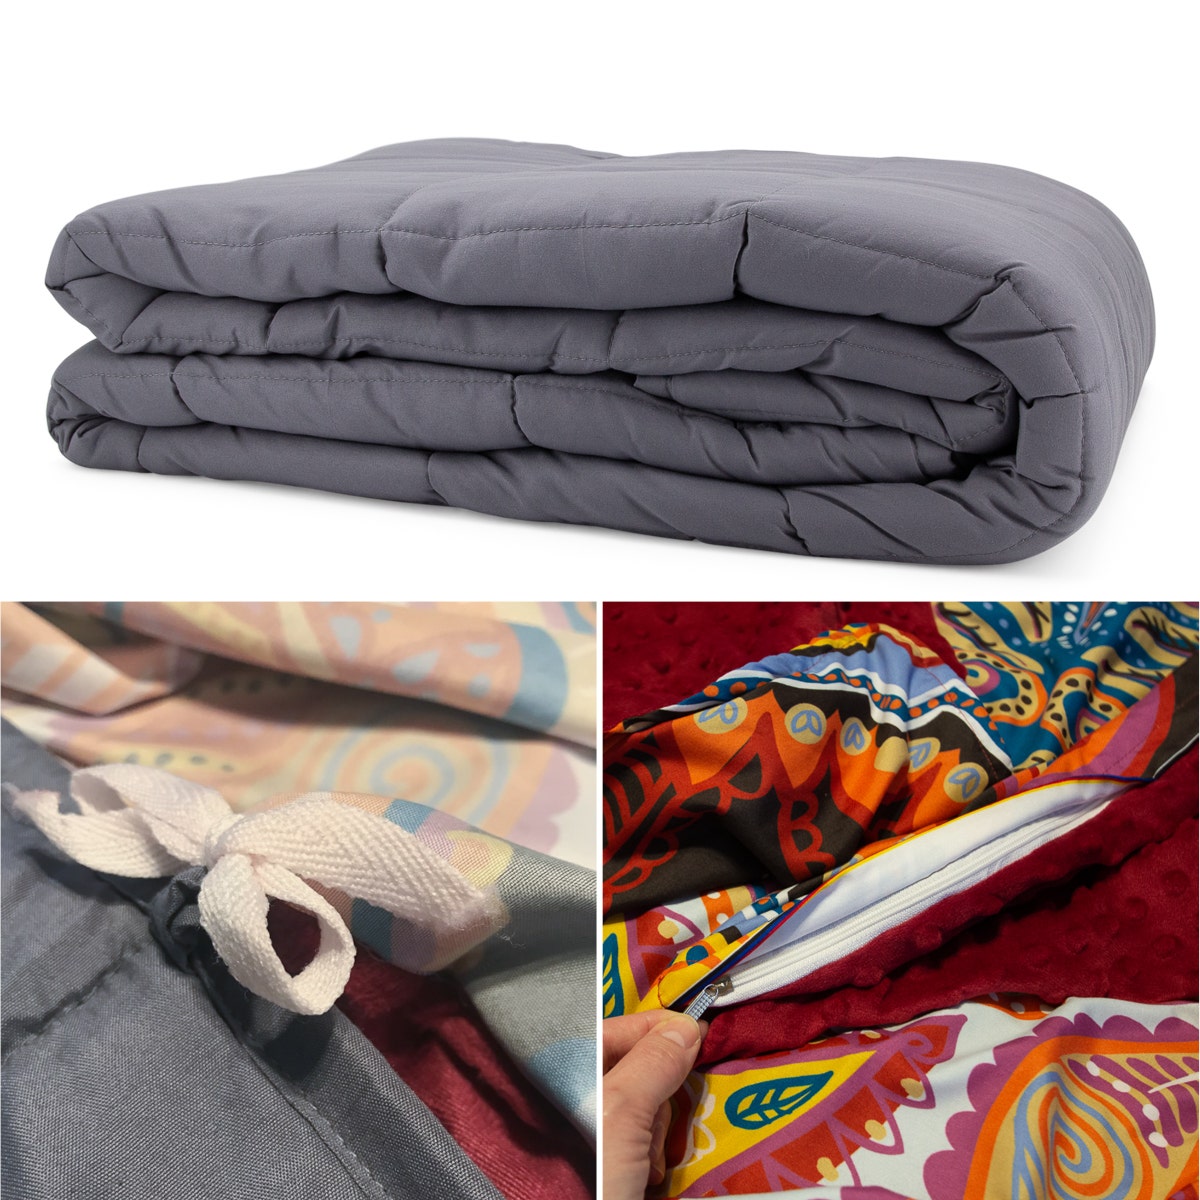 20lb Weighted Blanket, Removable Duvet Cover, Case – Queen Size